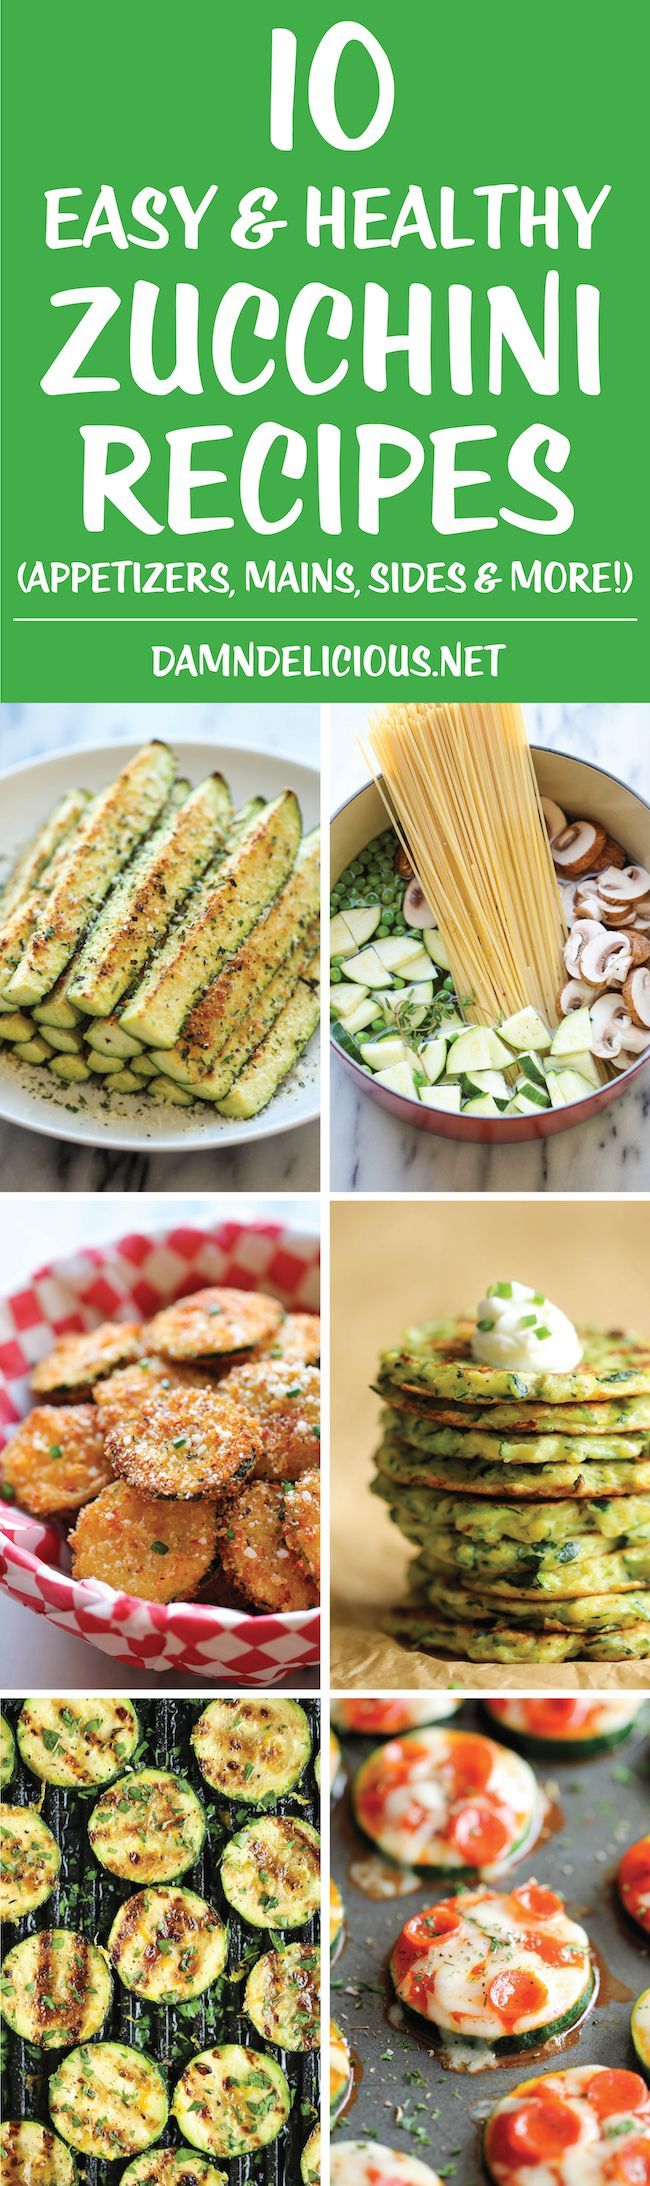 10 Easy and Healthy Zucchini Recipes – Use up all those lingering zucchinis in your garden with these easy, no-fuss recipes – full